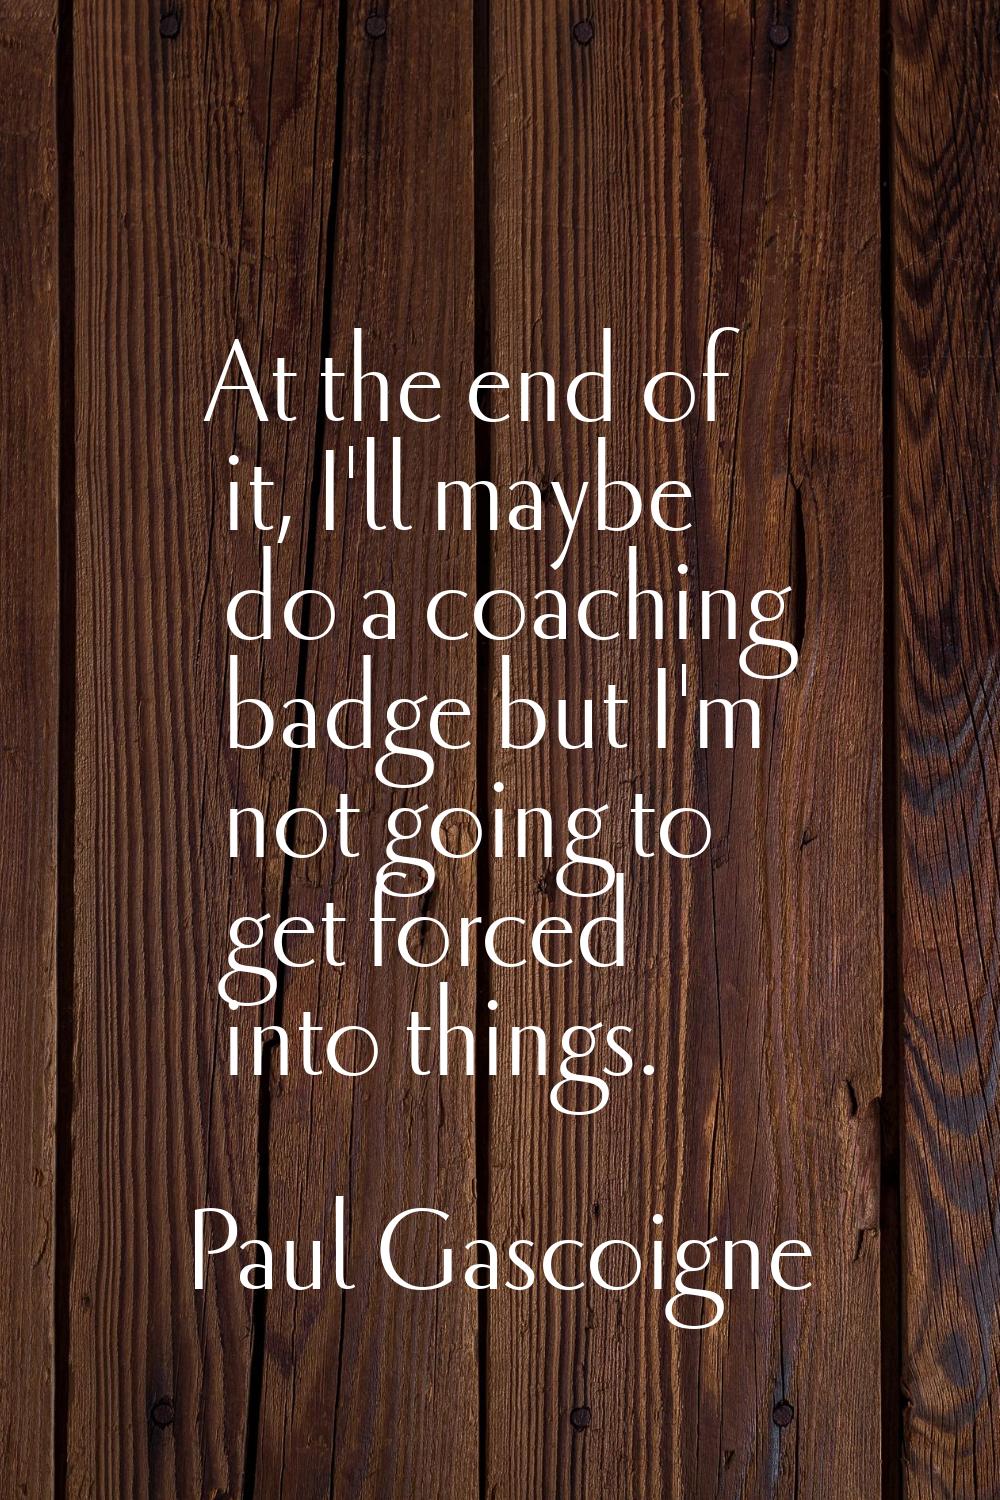 At the end of it, I'll maybe do a coaching badge but I'm not going to get forced into things.